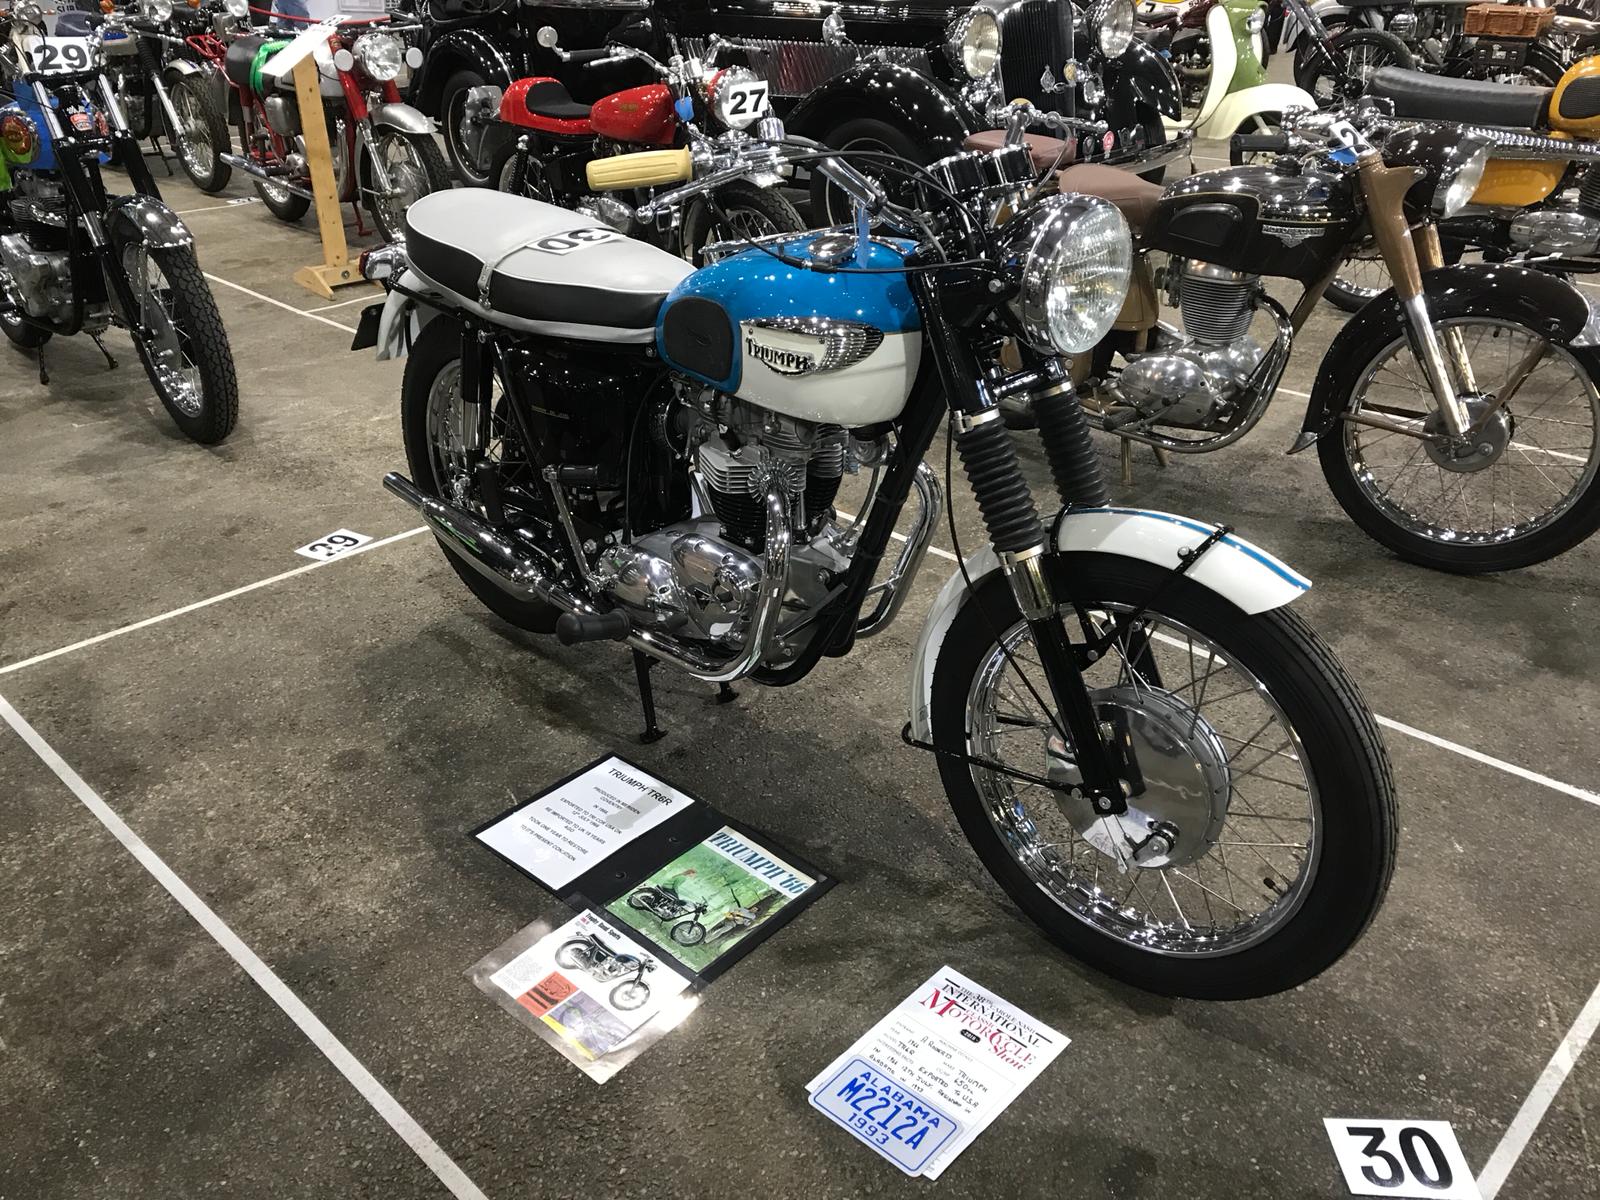 1st place in the classic category the 1966 Triumph TR6R 650cc